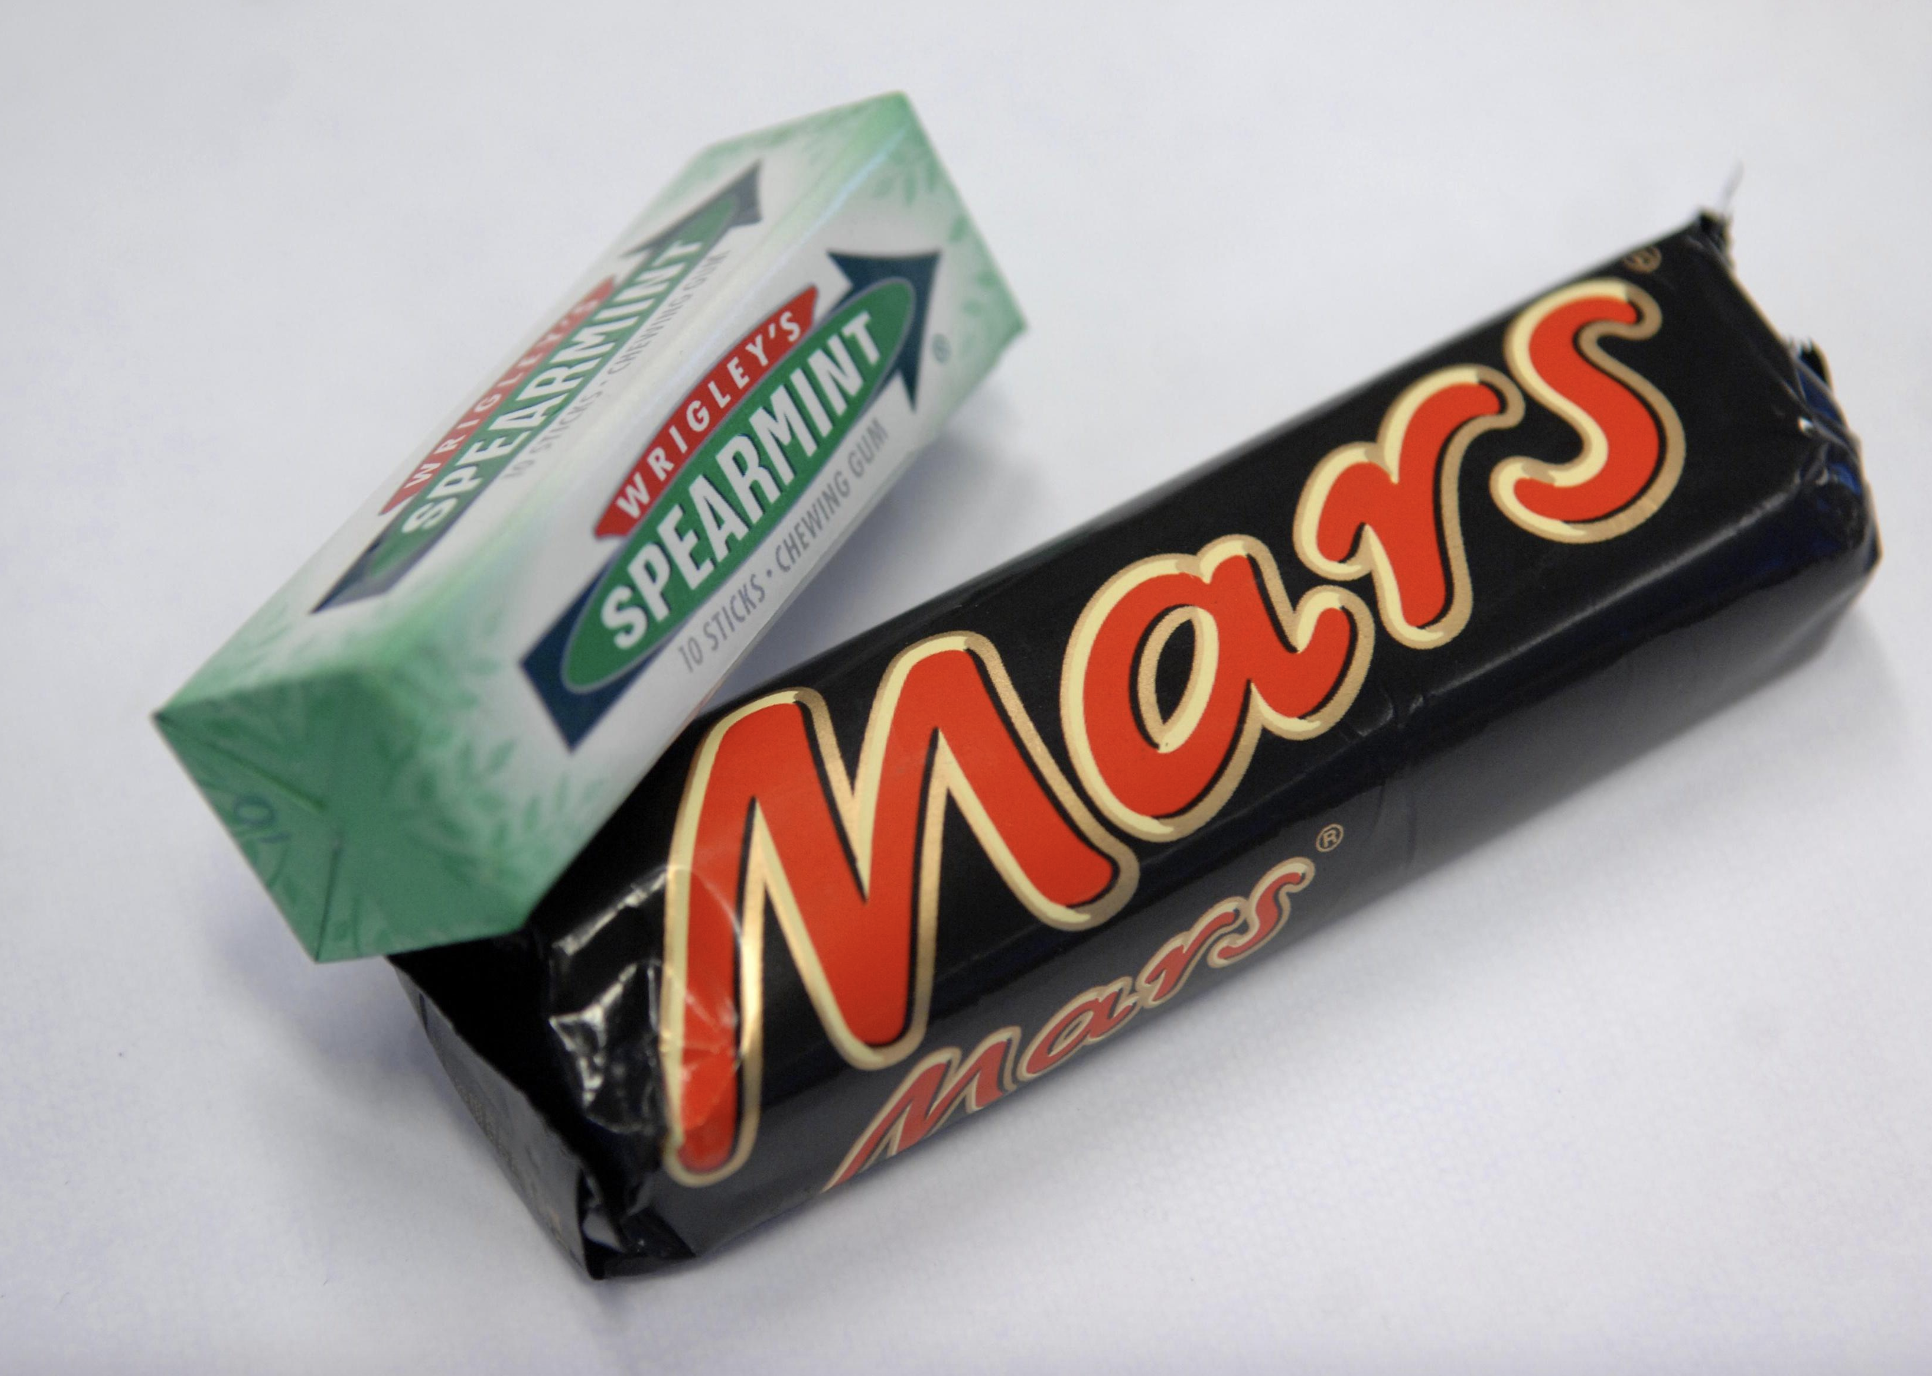 Wrigley's spearmint gum and a Mars bar lie side by side.